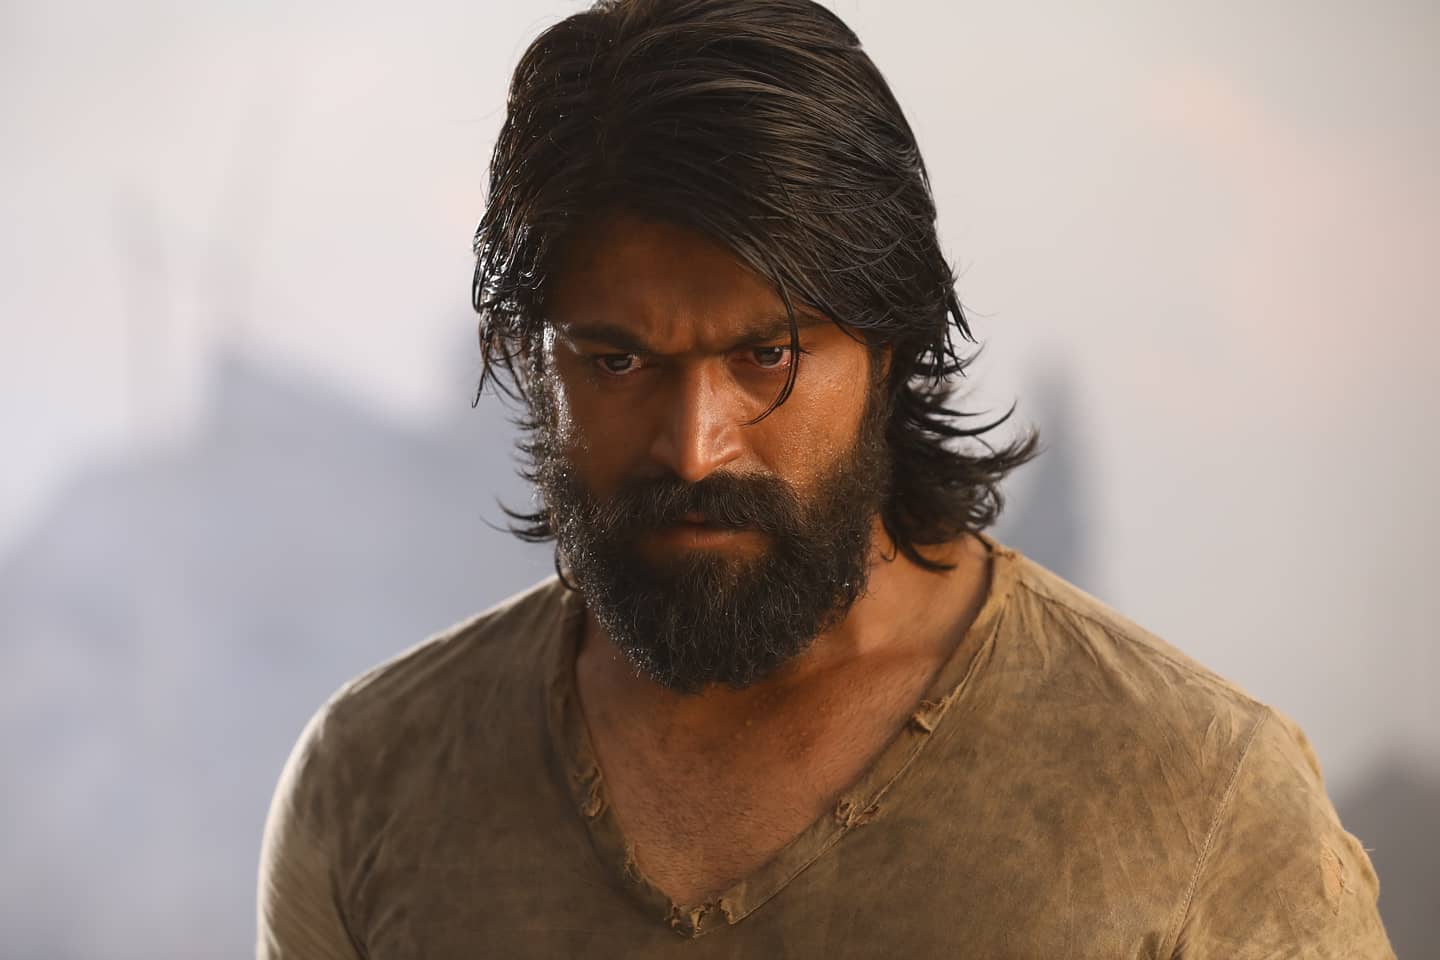 EXCLUSIVE: Team KGF share images from making of KGF: Chapter 2 ...